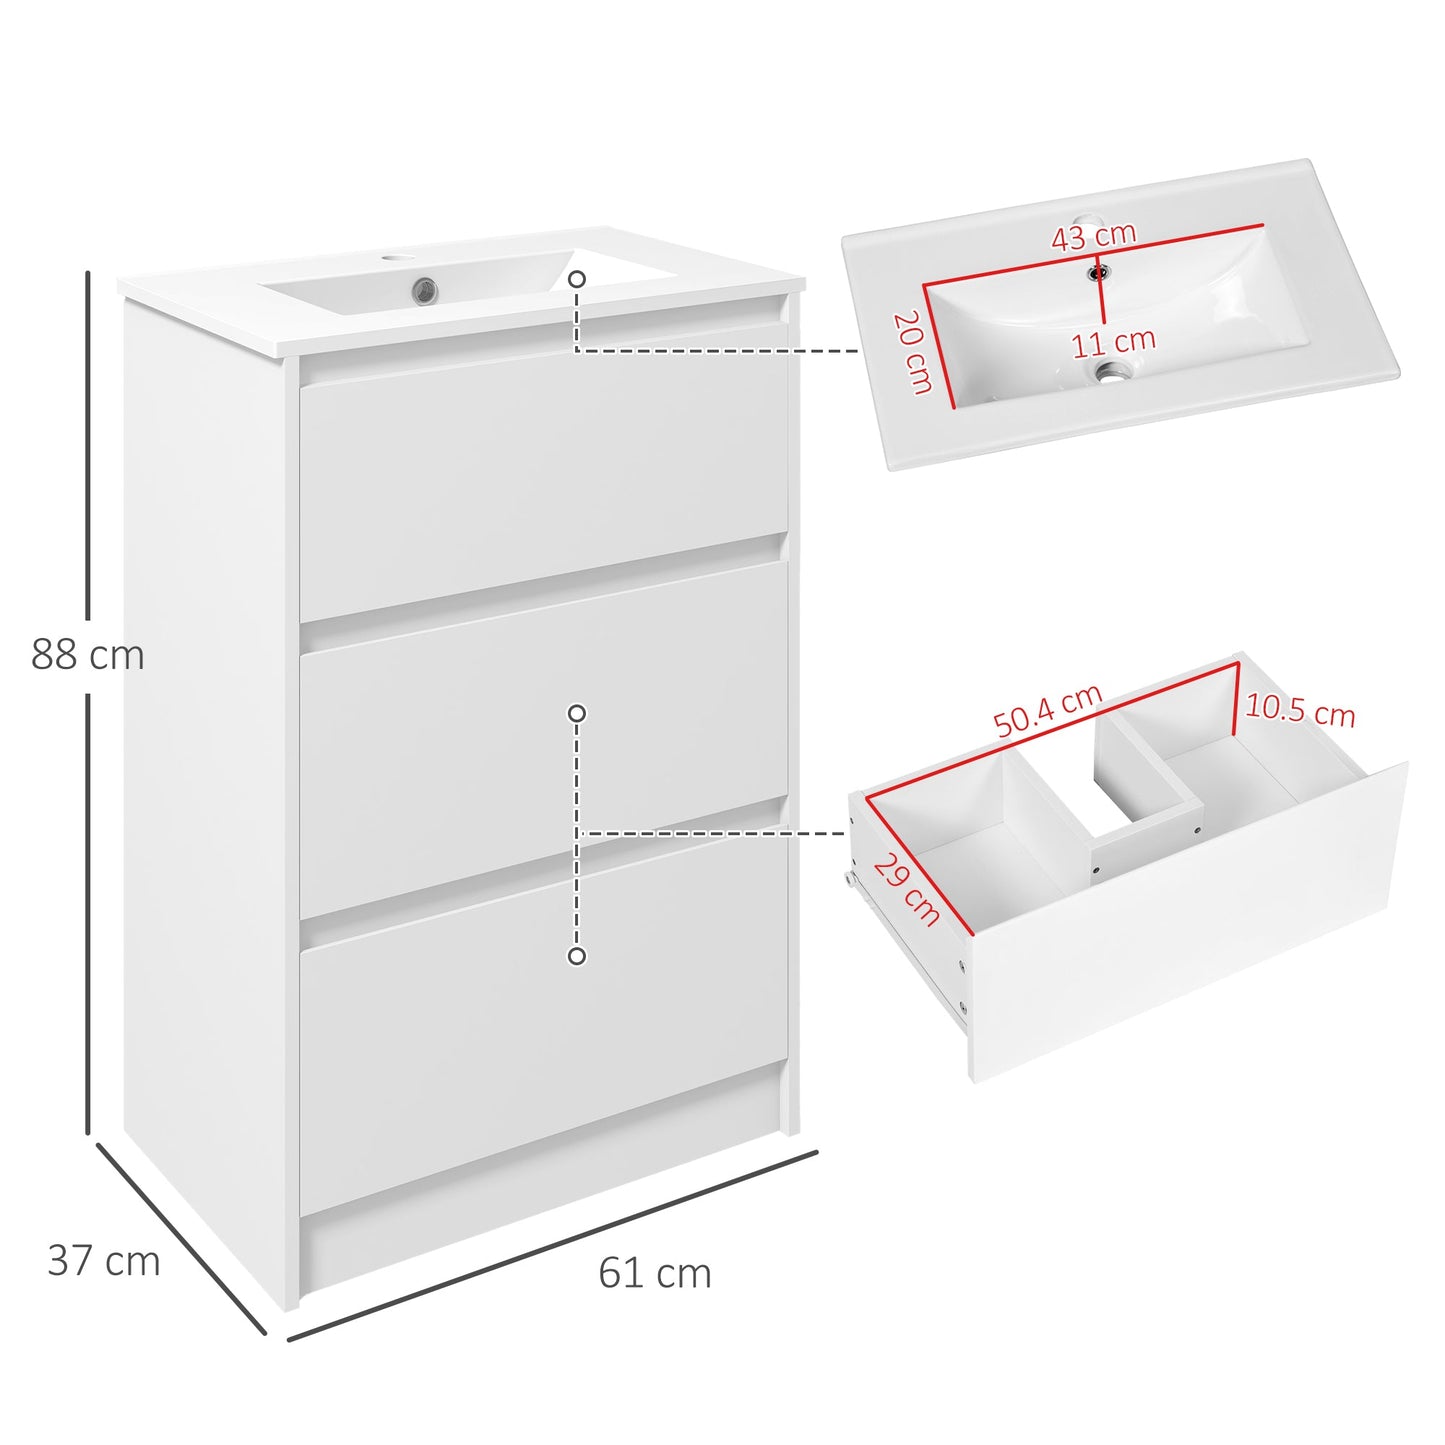 Kleankin 600mm Bathroom Vanity Unit with Basin and Single Tap Hole, High Gloss White Floor Standing Bathroom Sink Unit with 2 Drawers